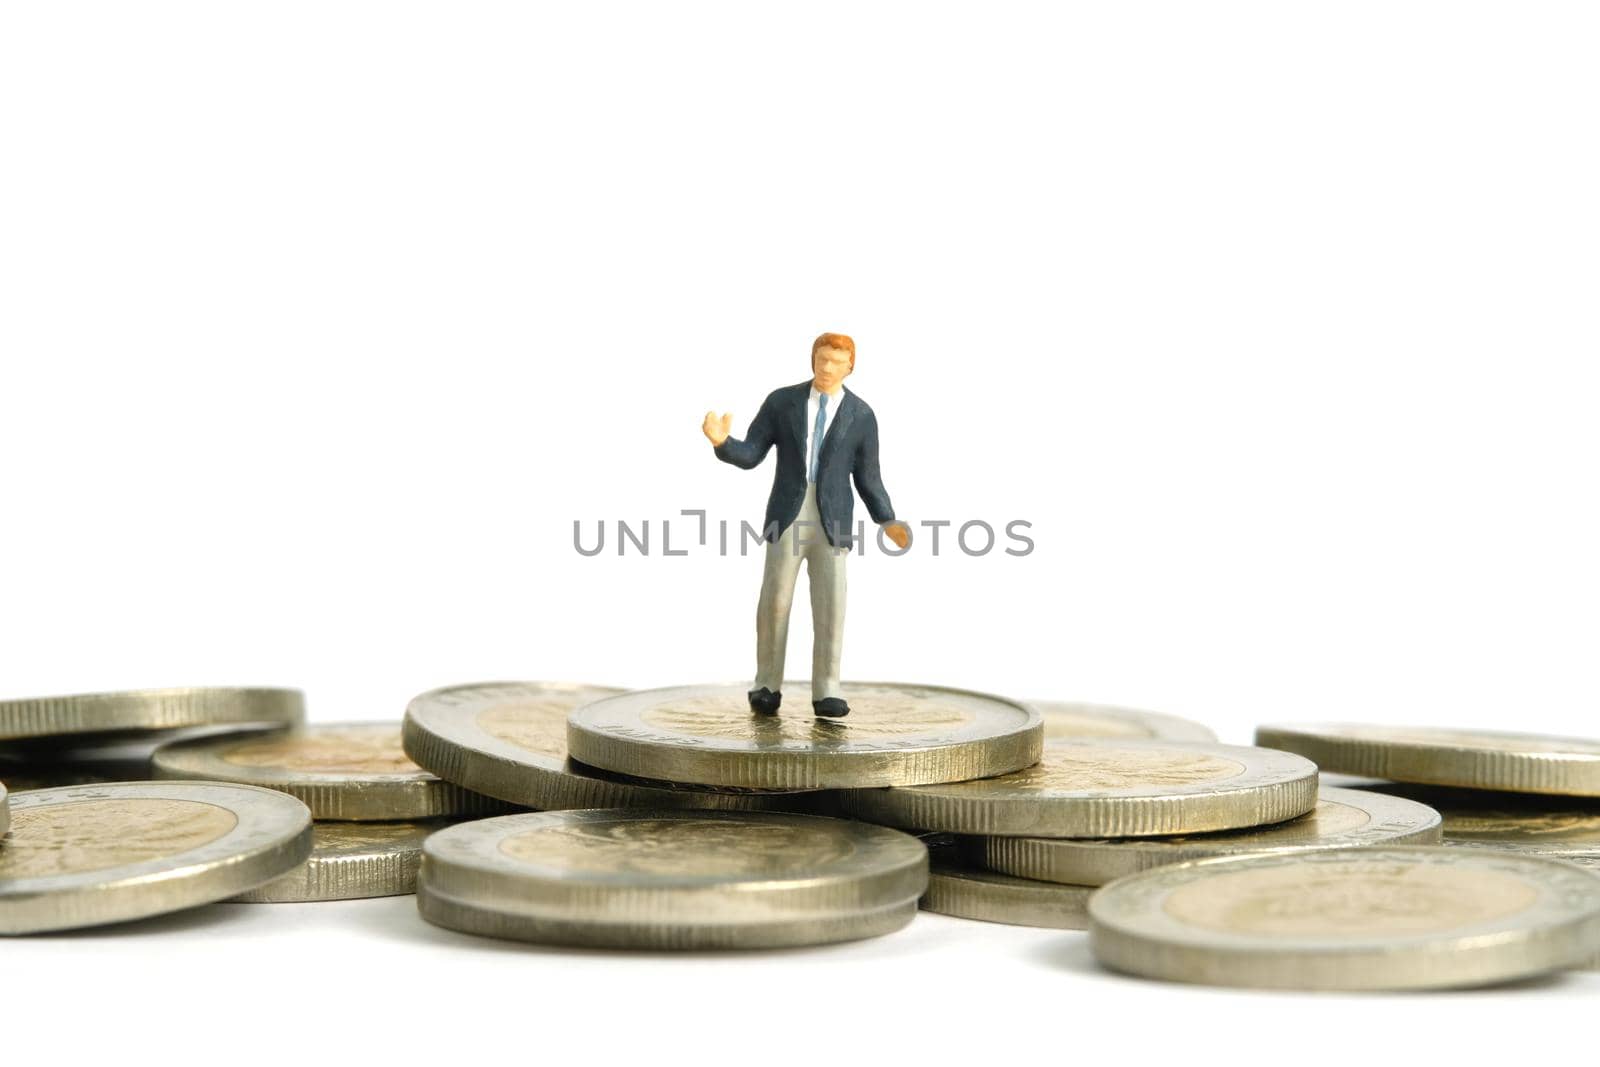 Miniature people toy figure photography. Financial plan concept. A shrugging businessman stand above coin money pile. Isolated on white background. Image photo